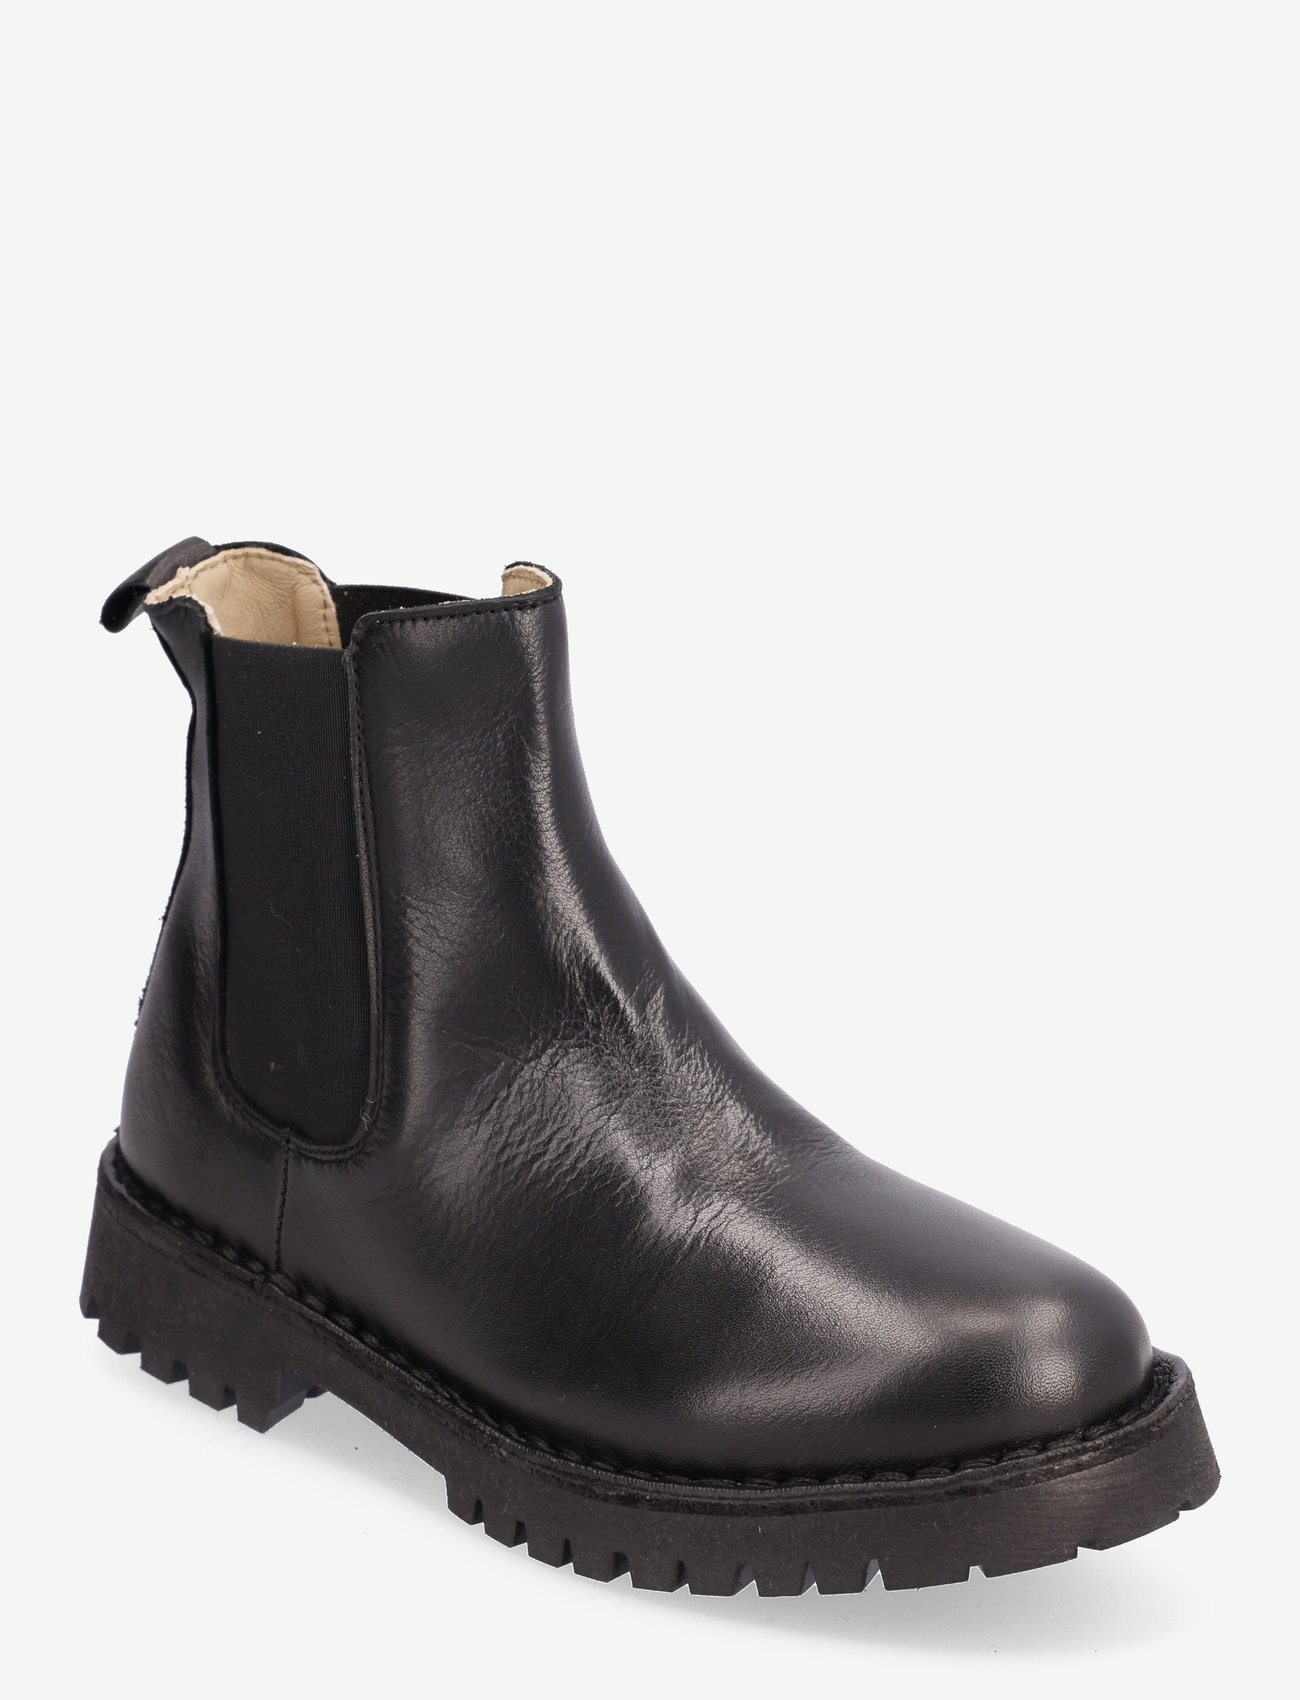 Selected Femme - SLFRILEY LEATHER CHELSEA BOOT - chelsea boots - black - 0